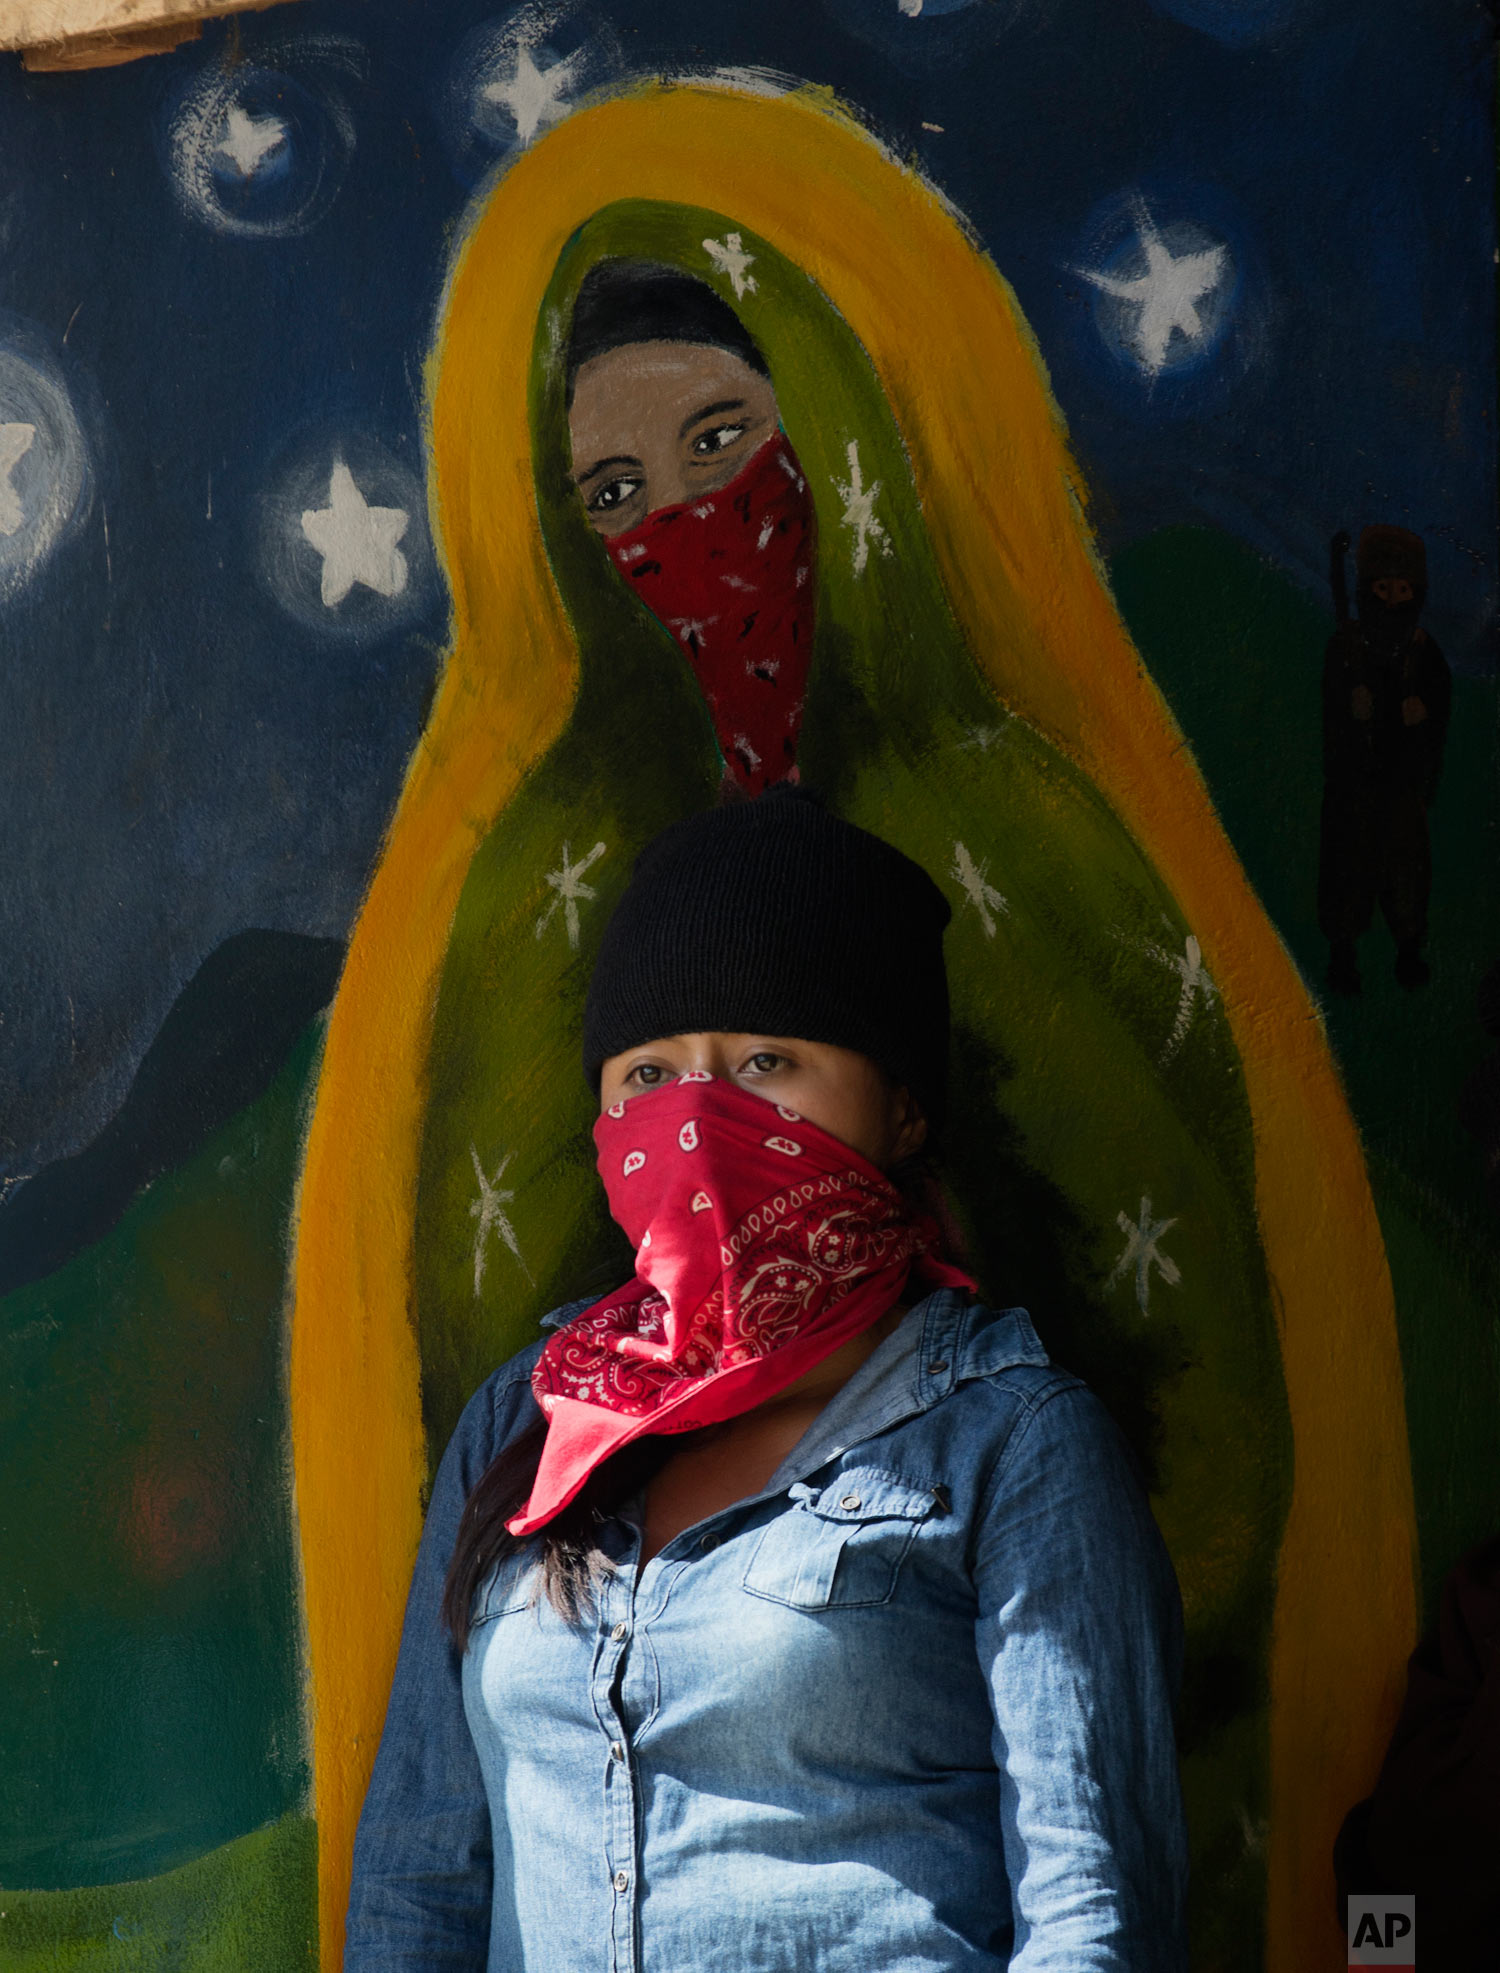  A masked, female member of the Zapatista National Liberation Army (EZLN) stands by a mural depicting a masked version of the Virgin of Guadalupe, at an event marking the 25th anniversary of the Zapatista uprising in La Realidad, Chiapas, Mexico, Jan